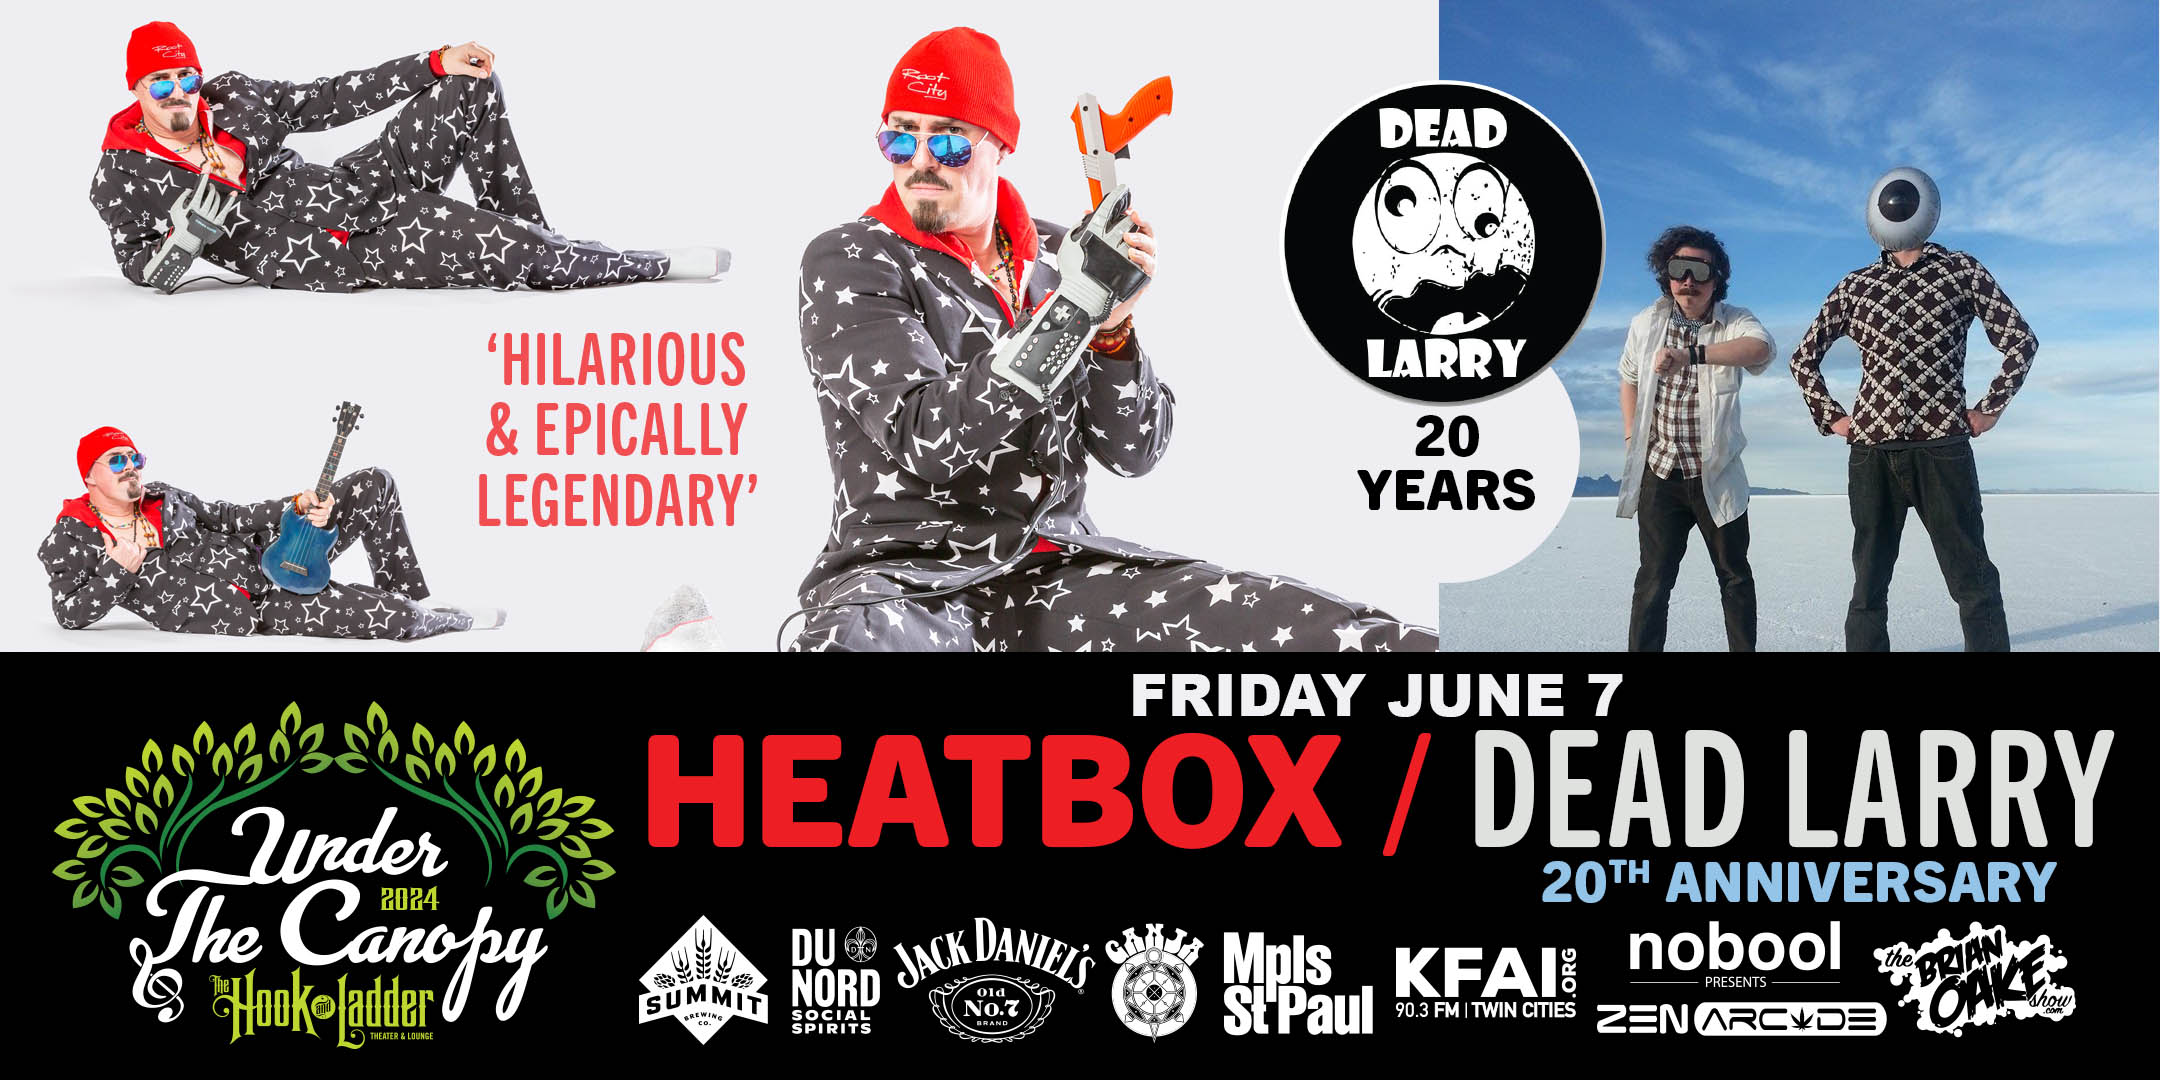 HEATBOX / DEAD LARRY 20th Anniversary Friday, June 7 Under The Canopy at The Hook and Ladder Theater "An Urban Outdoor Summer Concert Series" Doors 7:00pm :: Music 7:30pm :: 21+ Reserved Seats: $28 GA: $16 ADV / $22 DOS